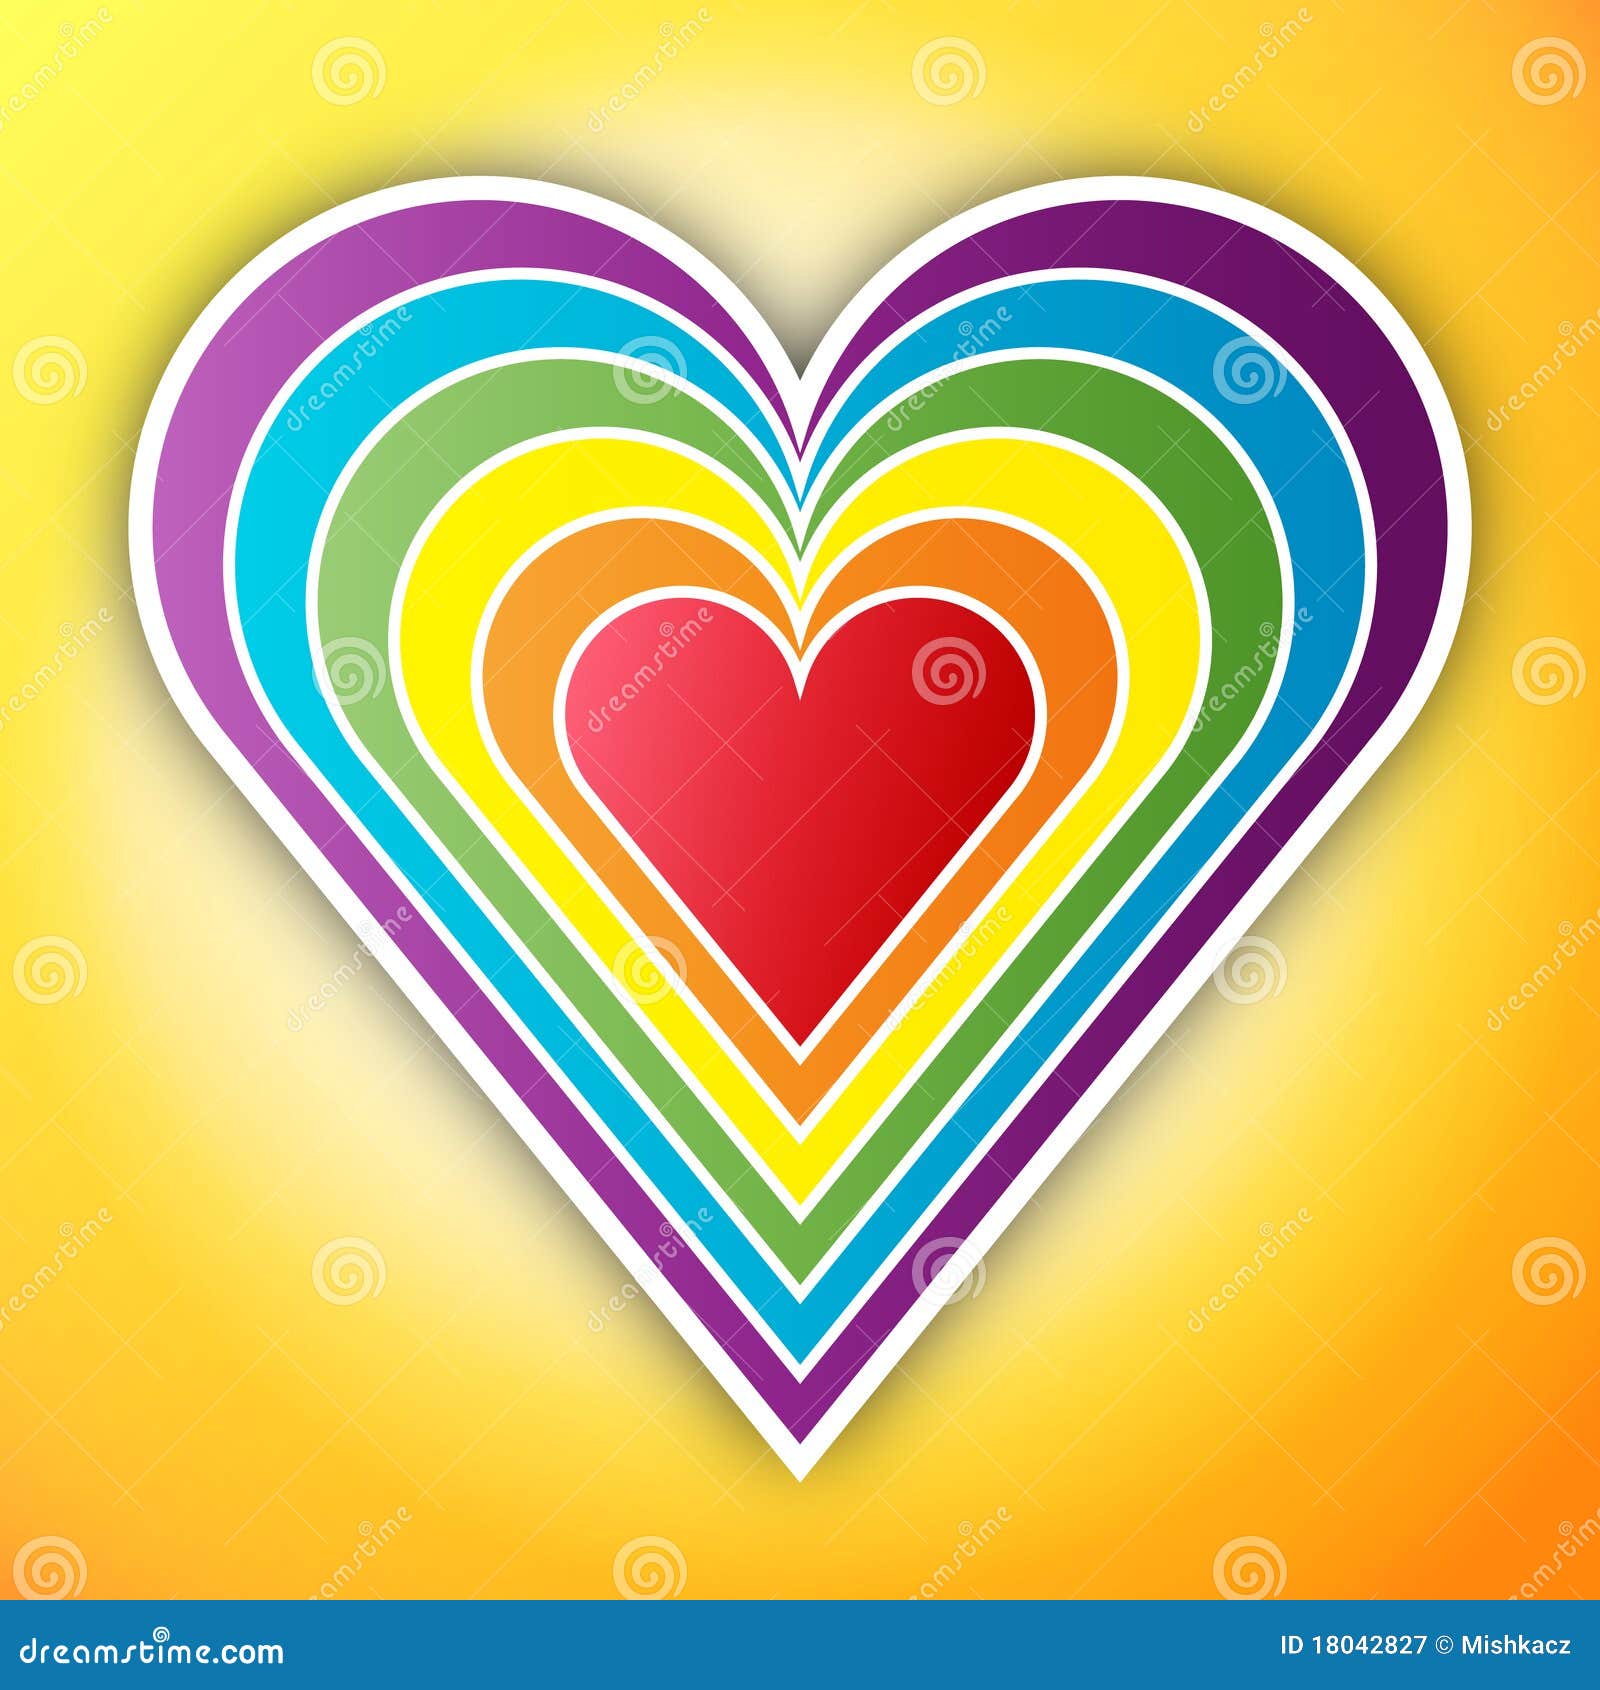 Rainbow heart stock vector. Image of colorful, greetings - 180428271300 x 1390